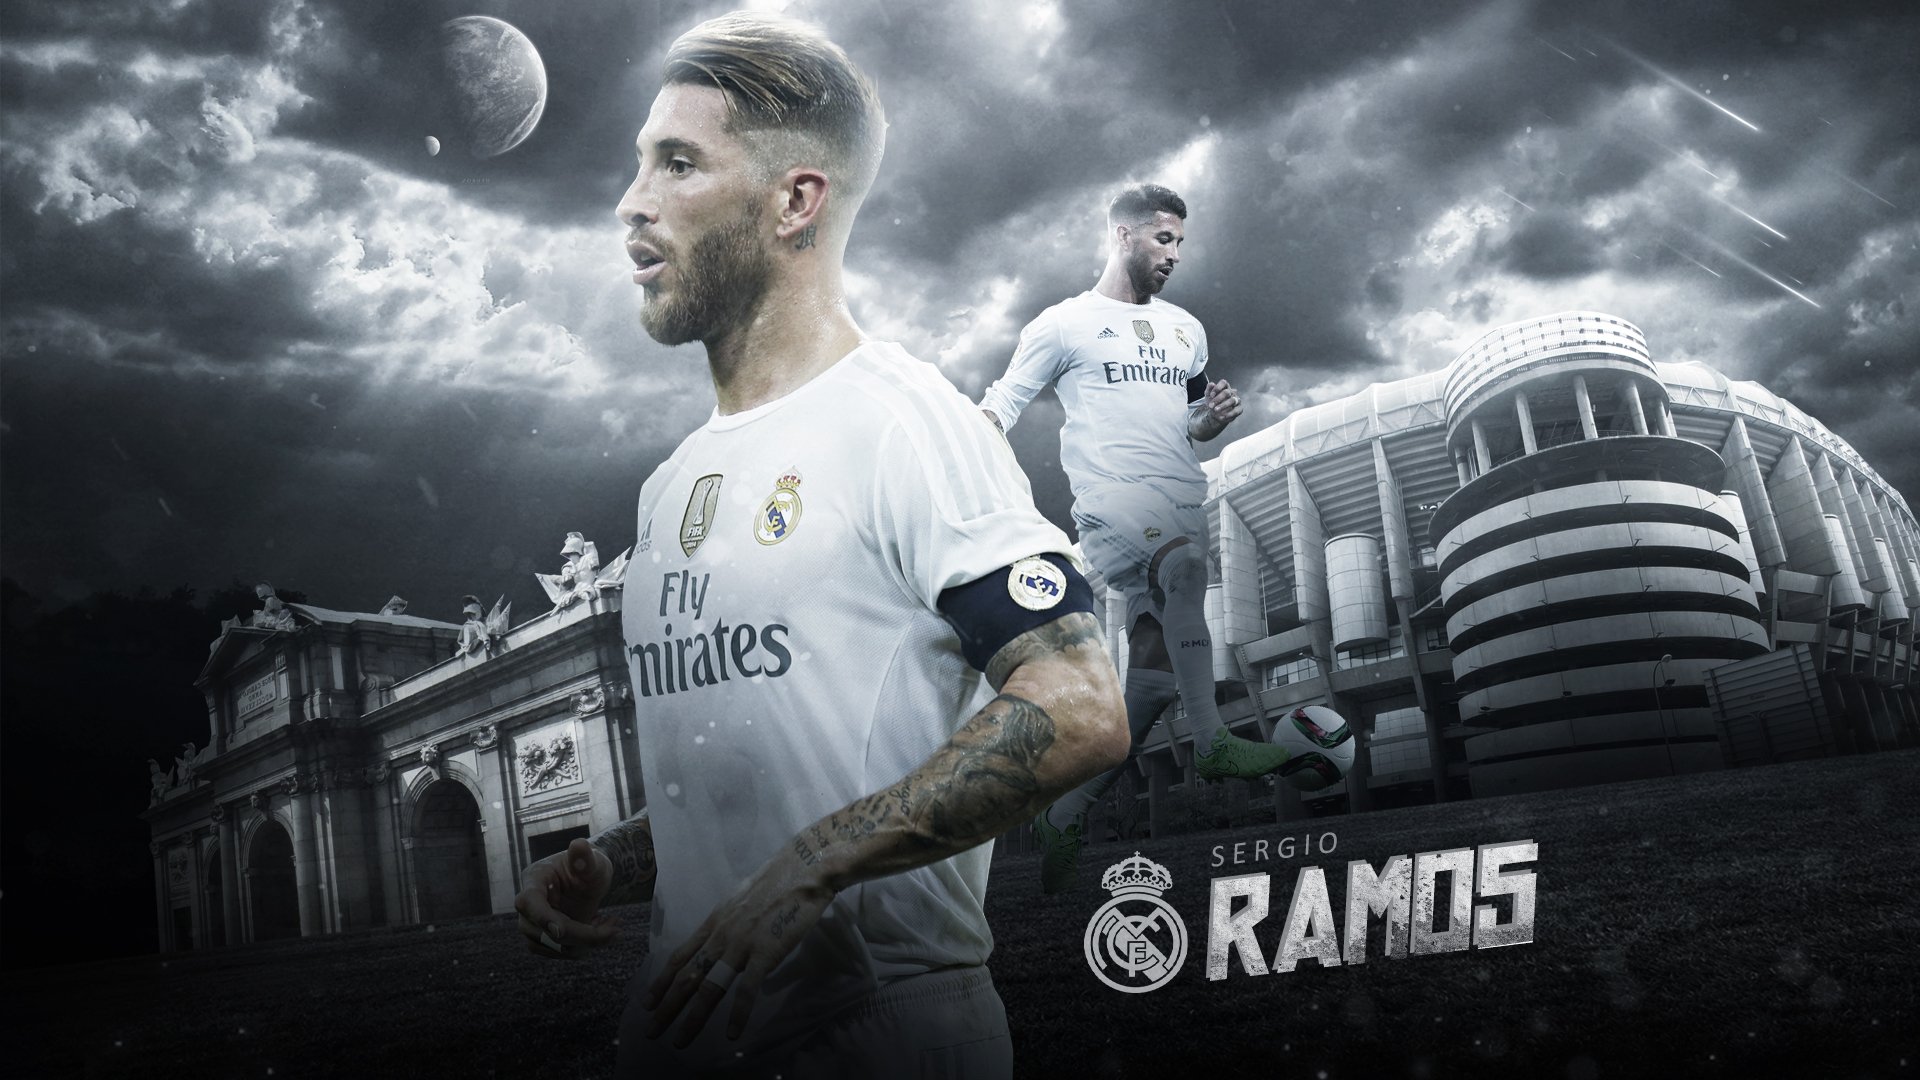 Sergio Ramos HD Wallpaper - Background Image - 1920x1080 - ID:959257 - Wallpaper Abyss